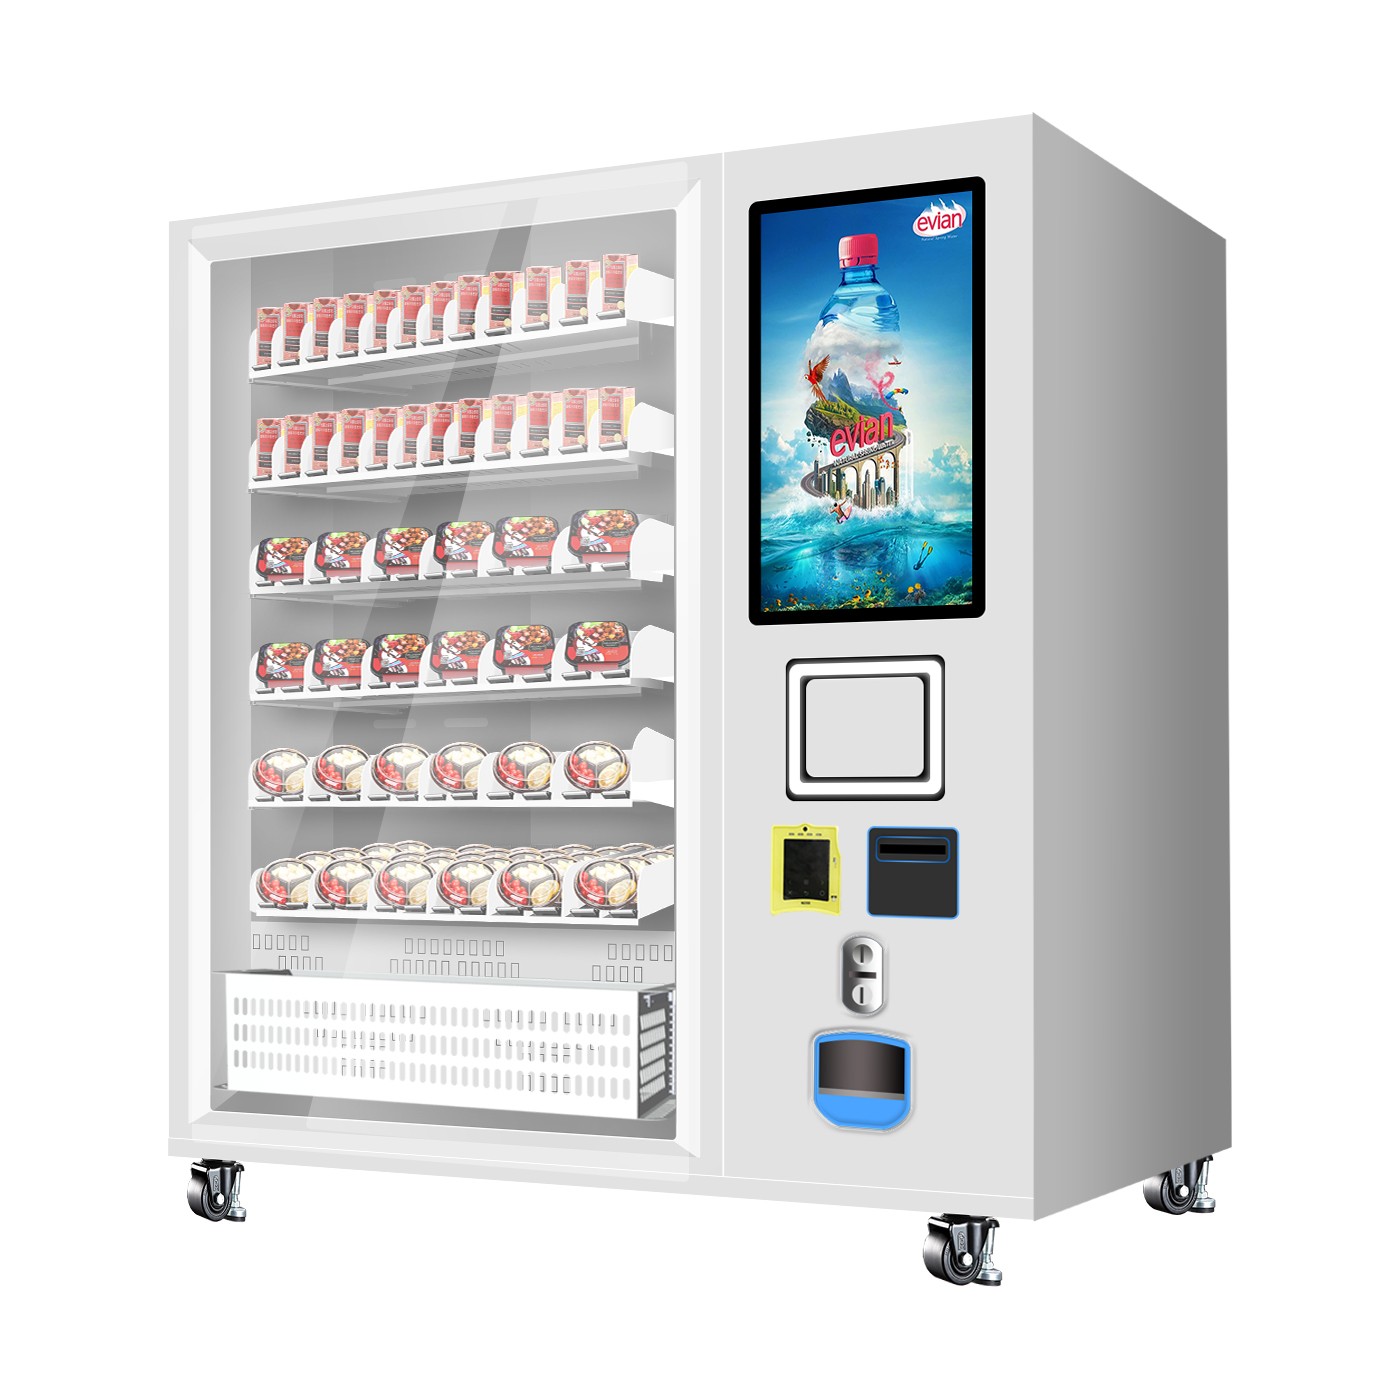 32 Inch Touch Screen Smart Vending Machine with Lift